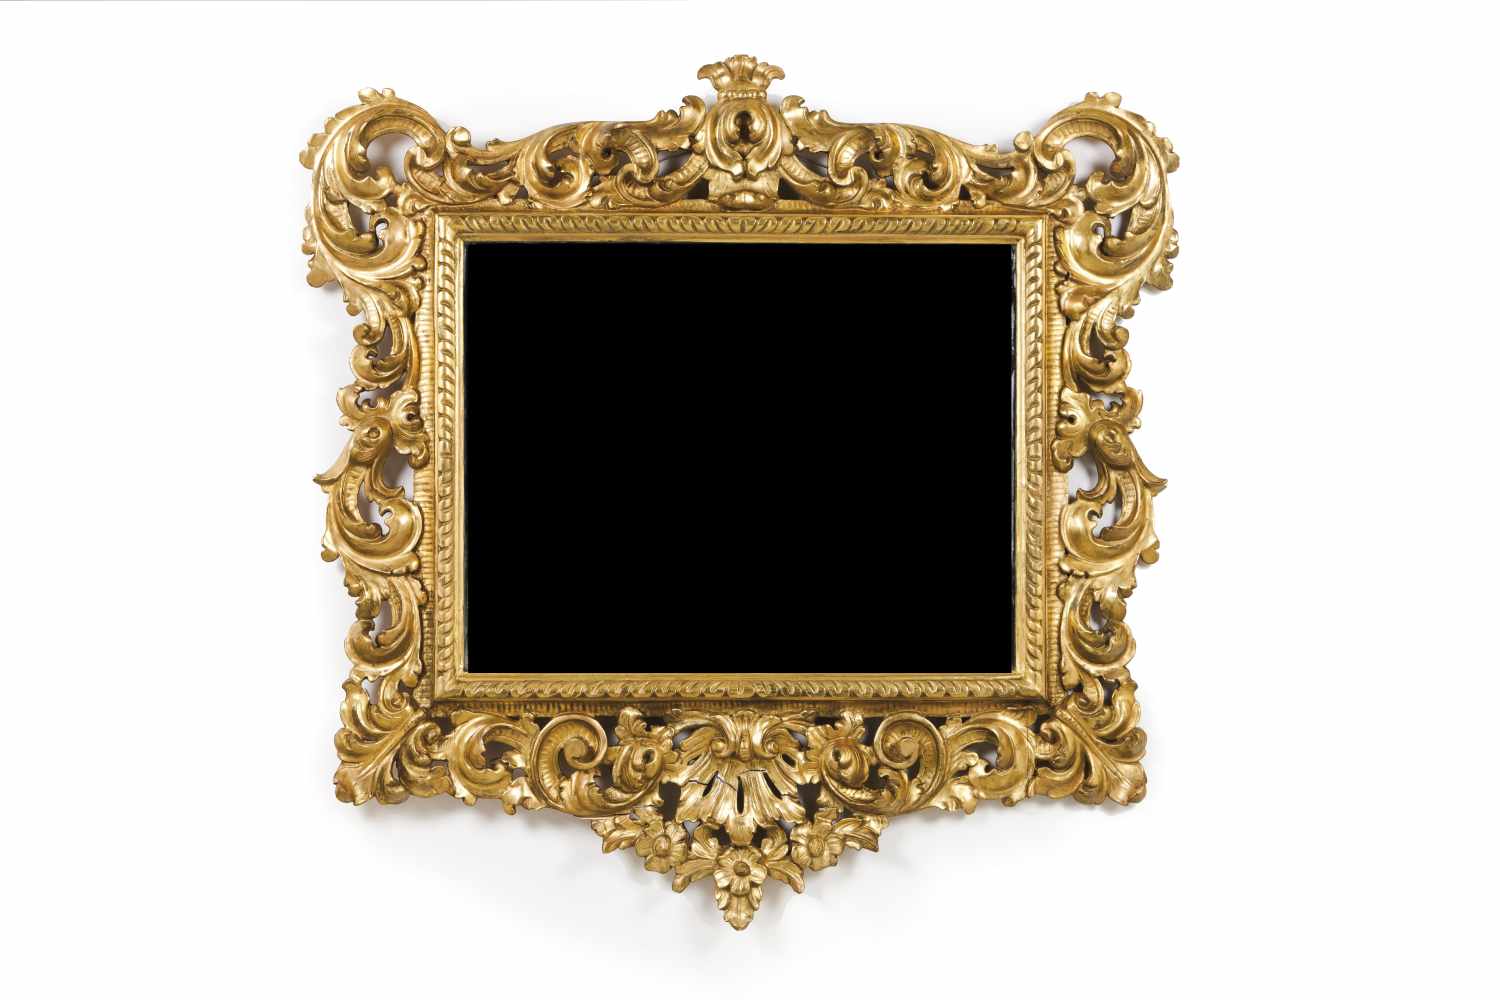 Wall mirrorCarved and gilt woodSpain, 20th century(losses and defects)103x94 cm